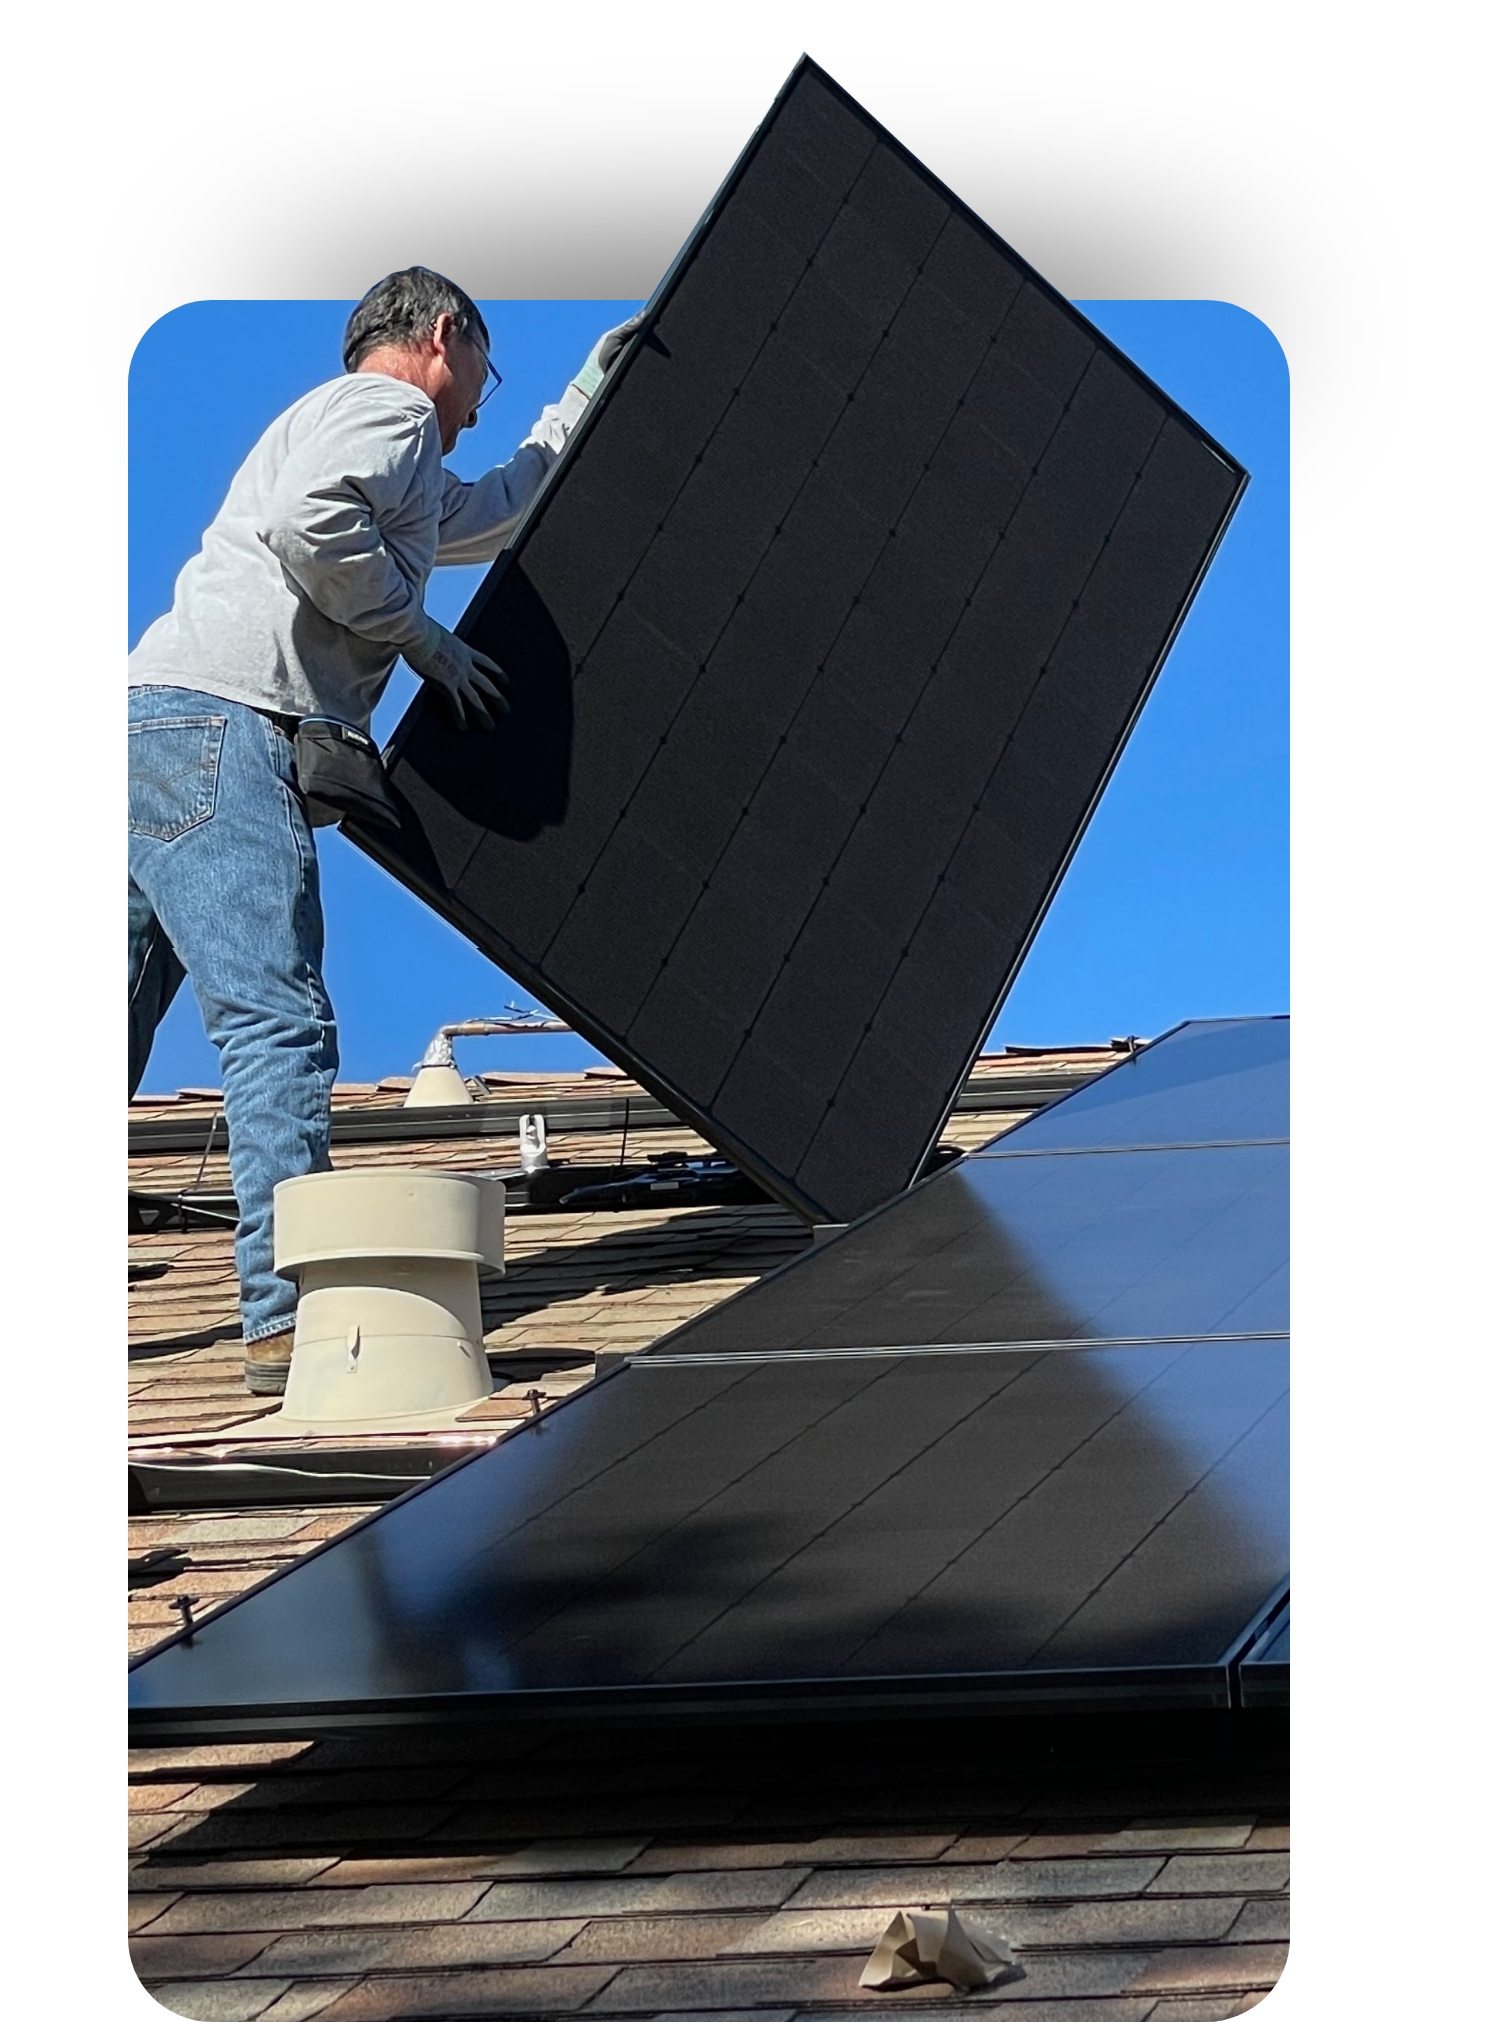 Our solar panel installers beat out the best solar companies in Parker, CO, with financing options and professional service.